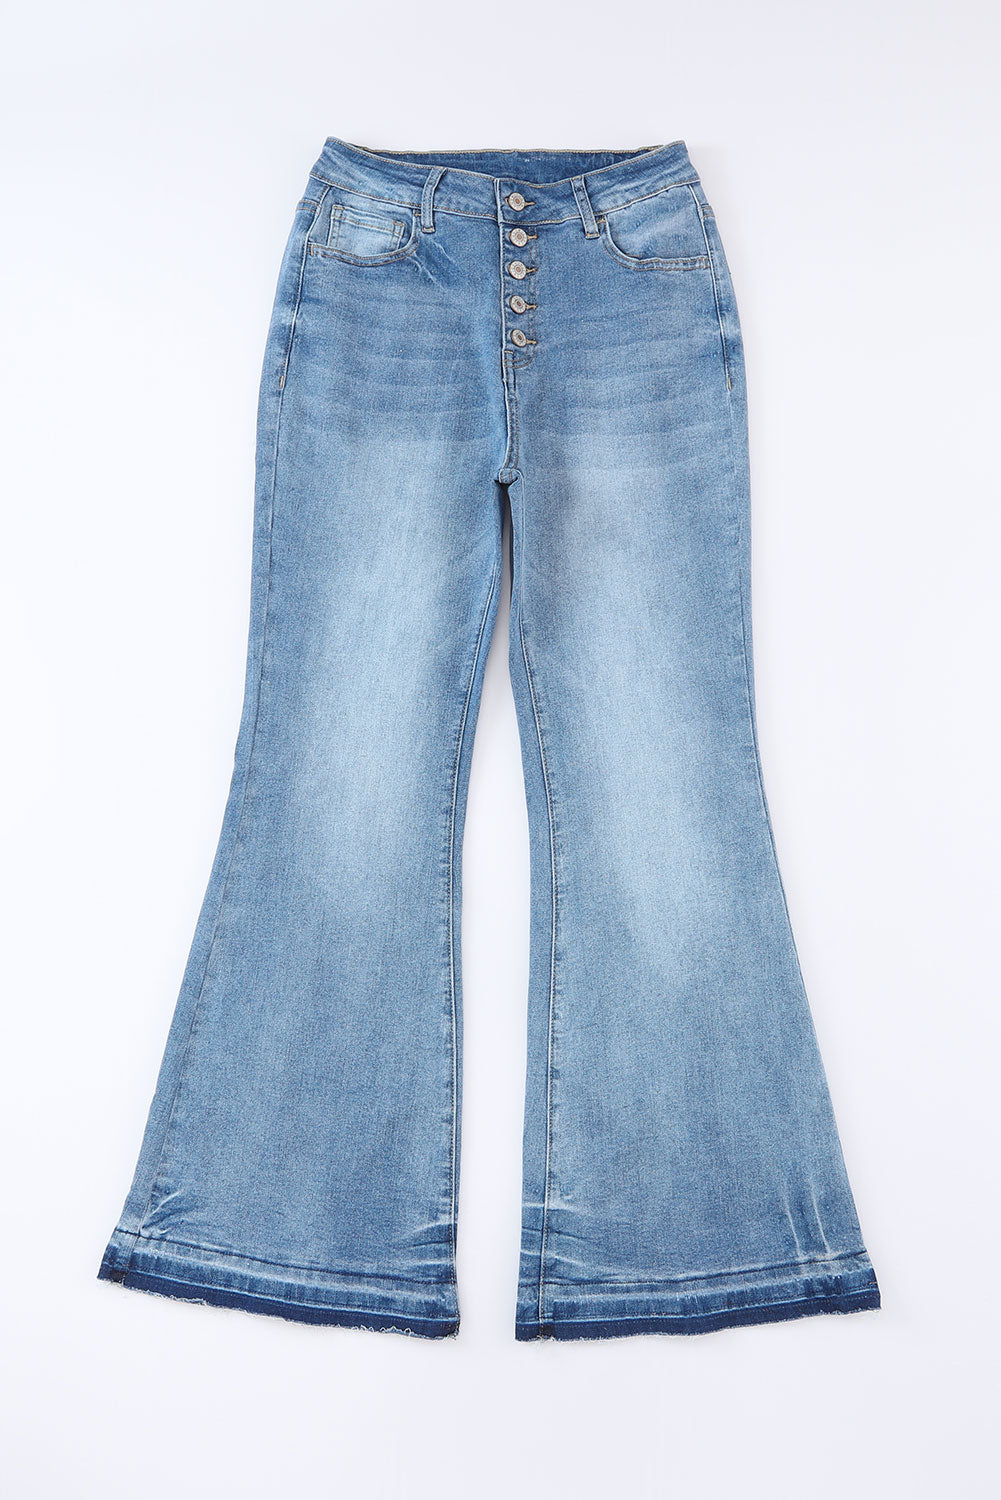 Blue Light Wash High Waisted Bell Bottom Jeans - Bellisima Clothing Collective